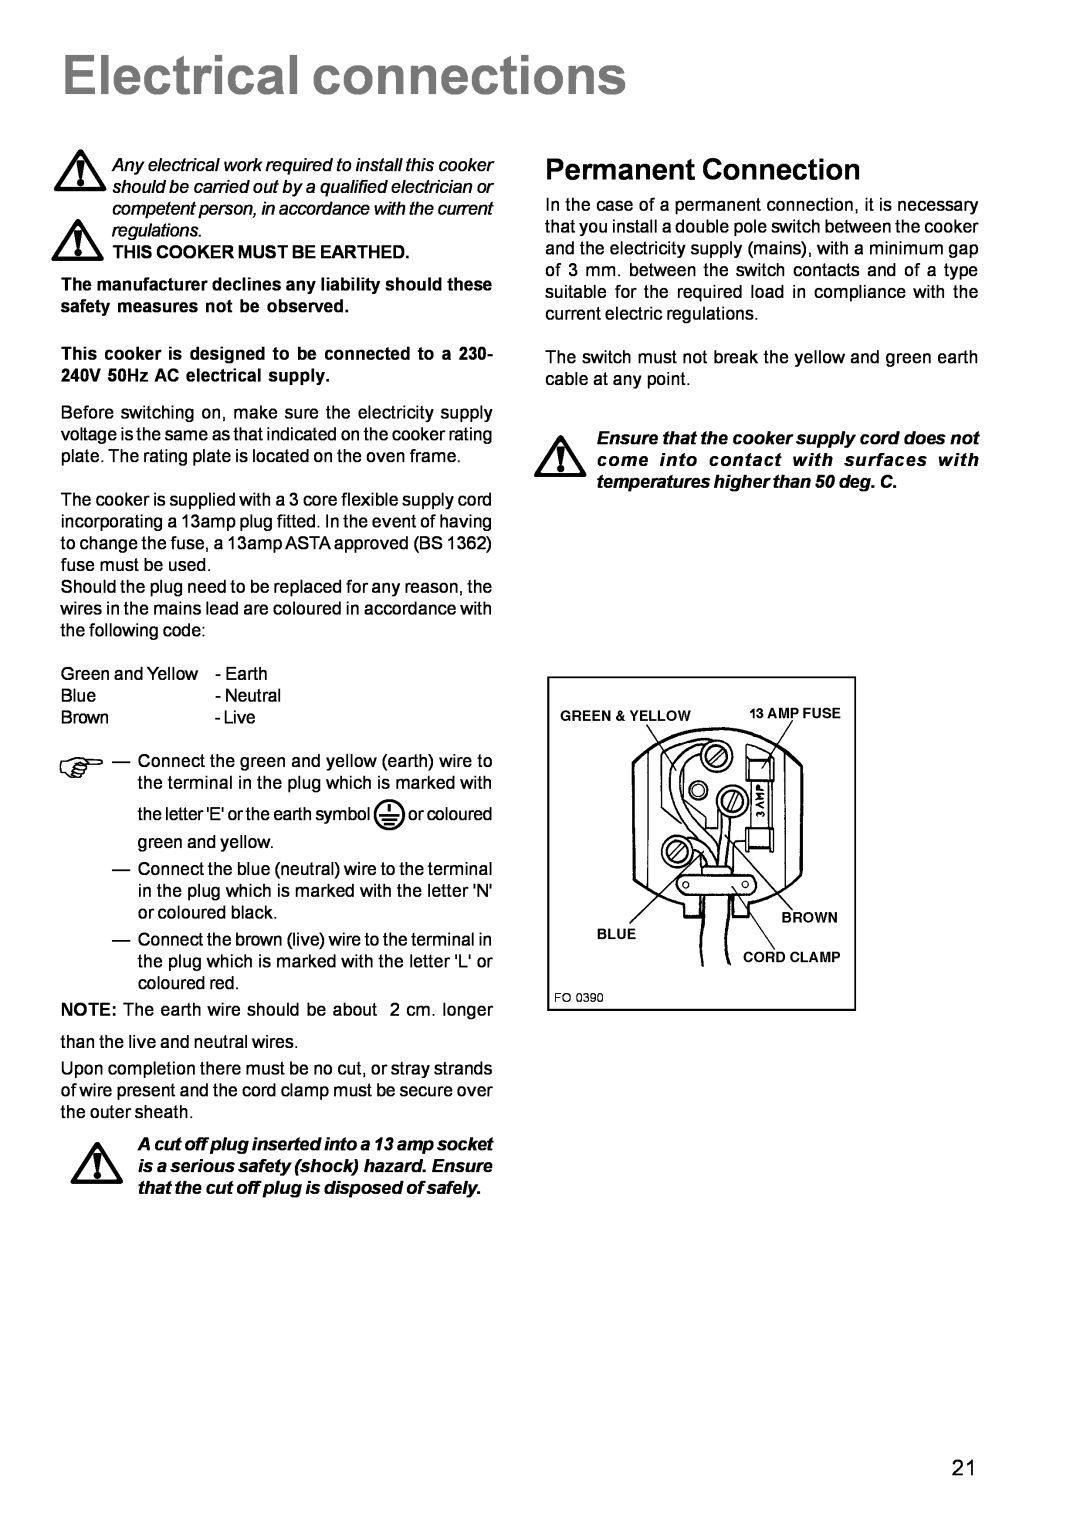 Electrolux CSIG 509 manual Electrical connections, Permanent Connection 